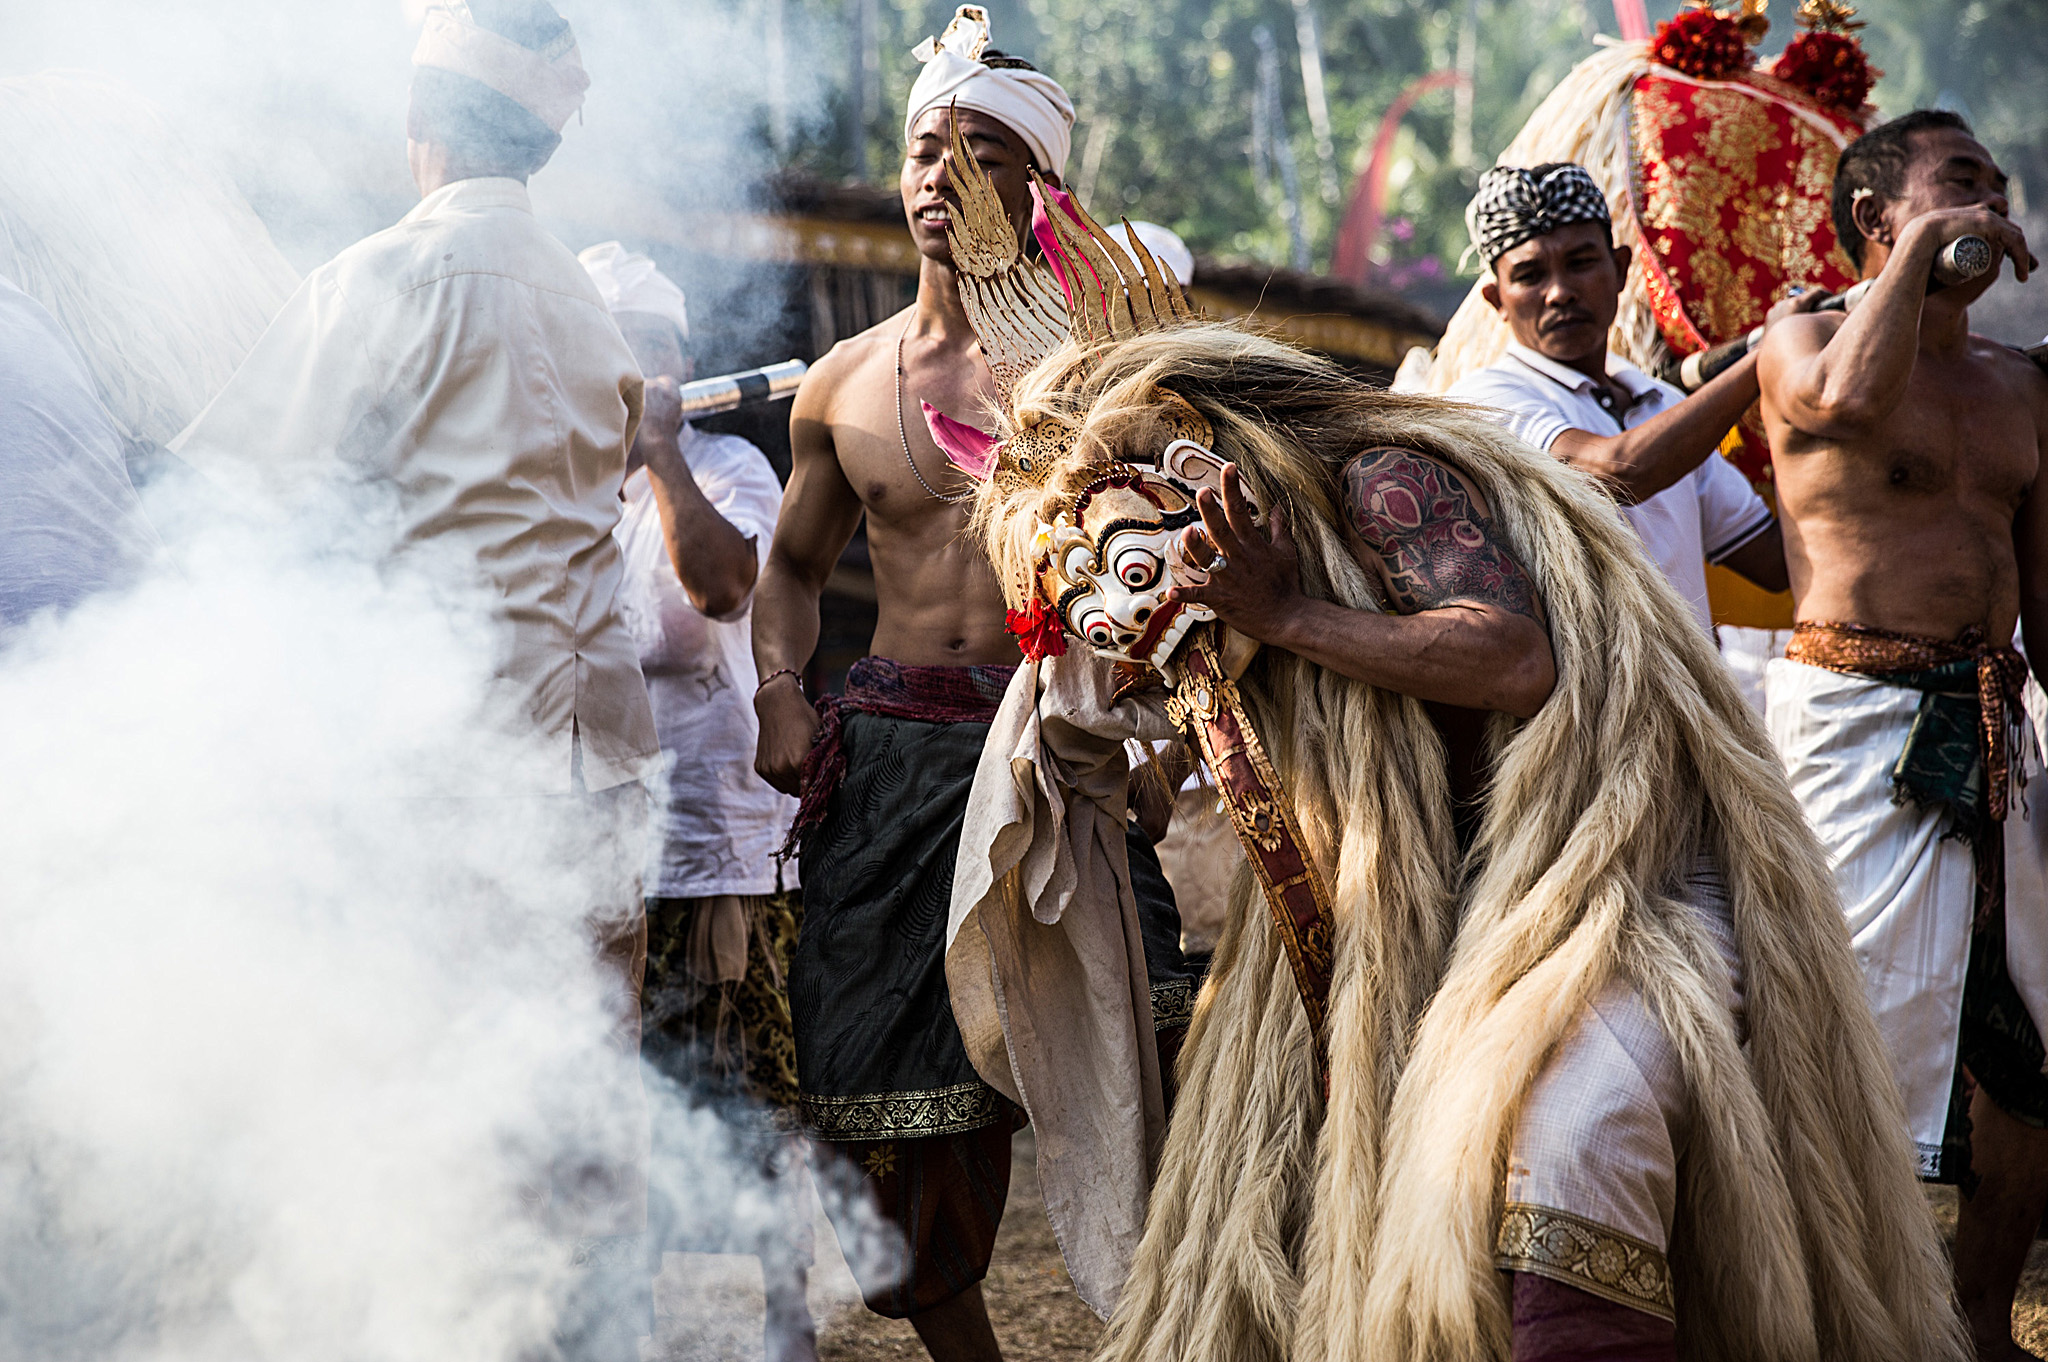 Balinese Villagers Celebrate The Annual Ngusaba Puseh Ritual